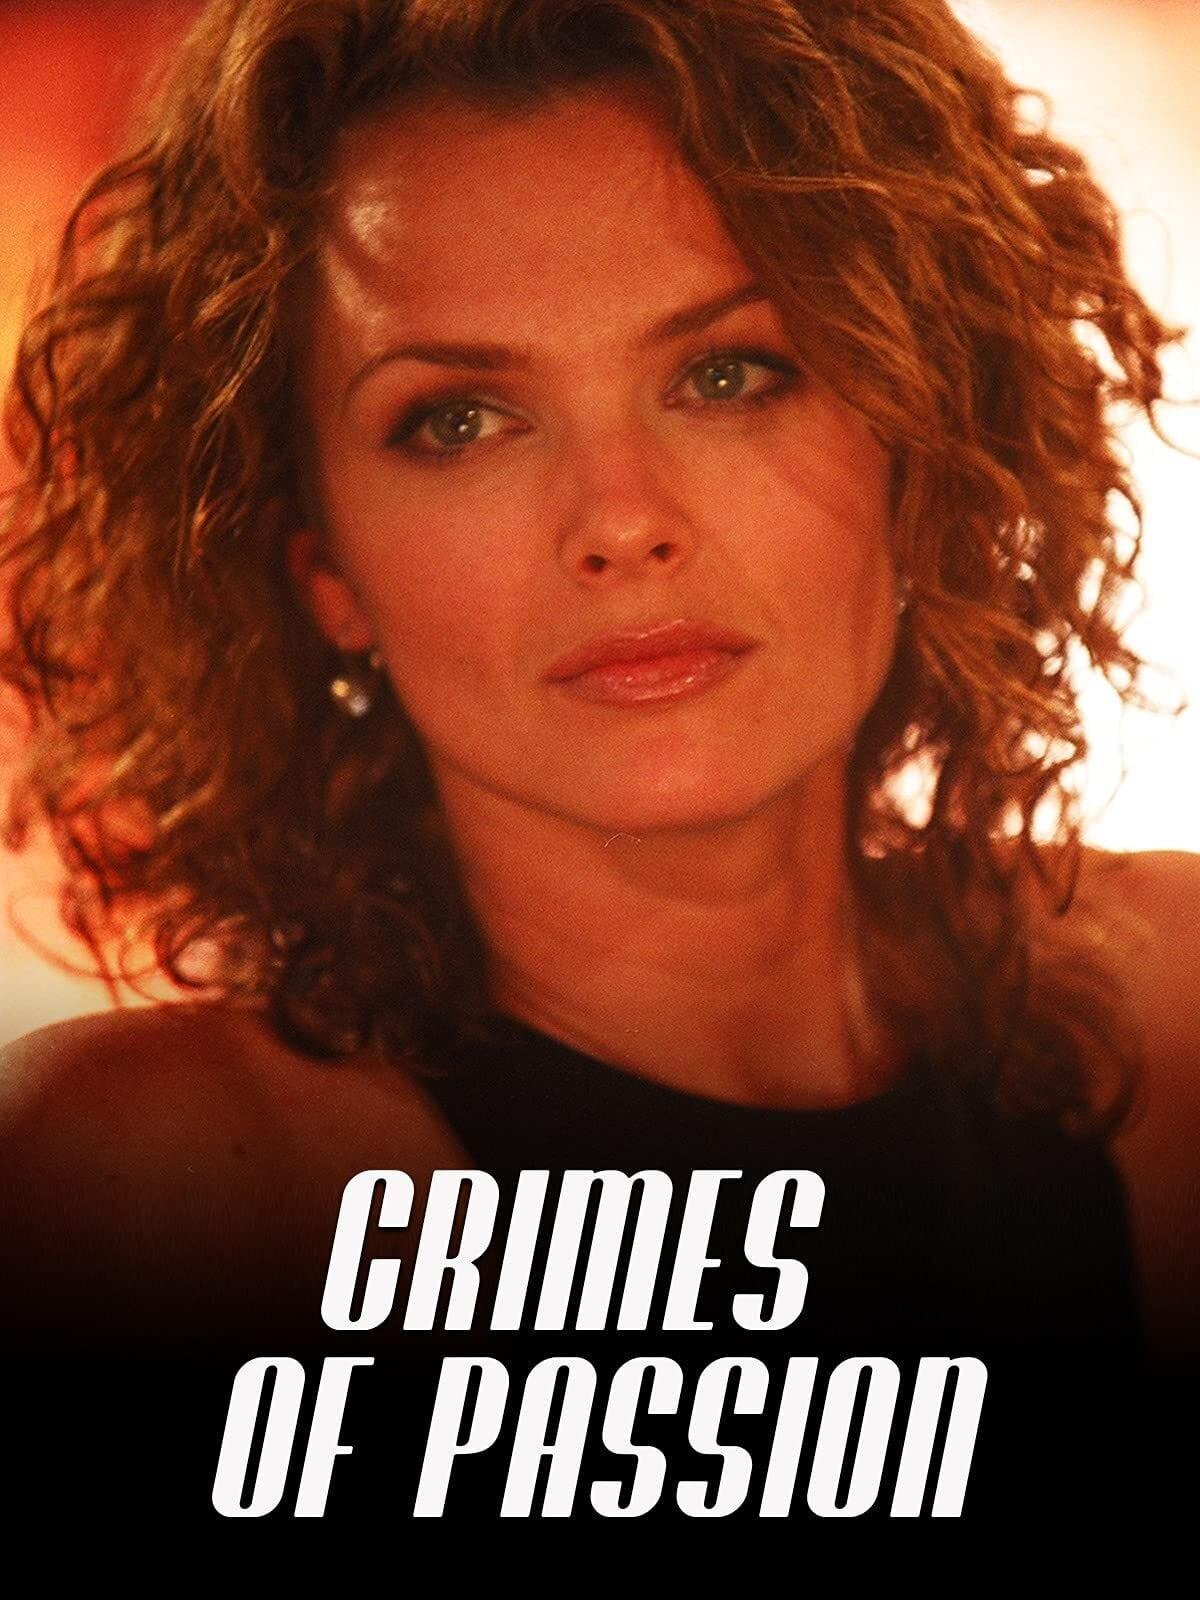 Crimes of Passion poster